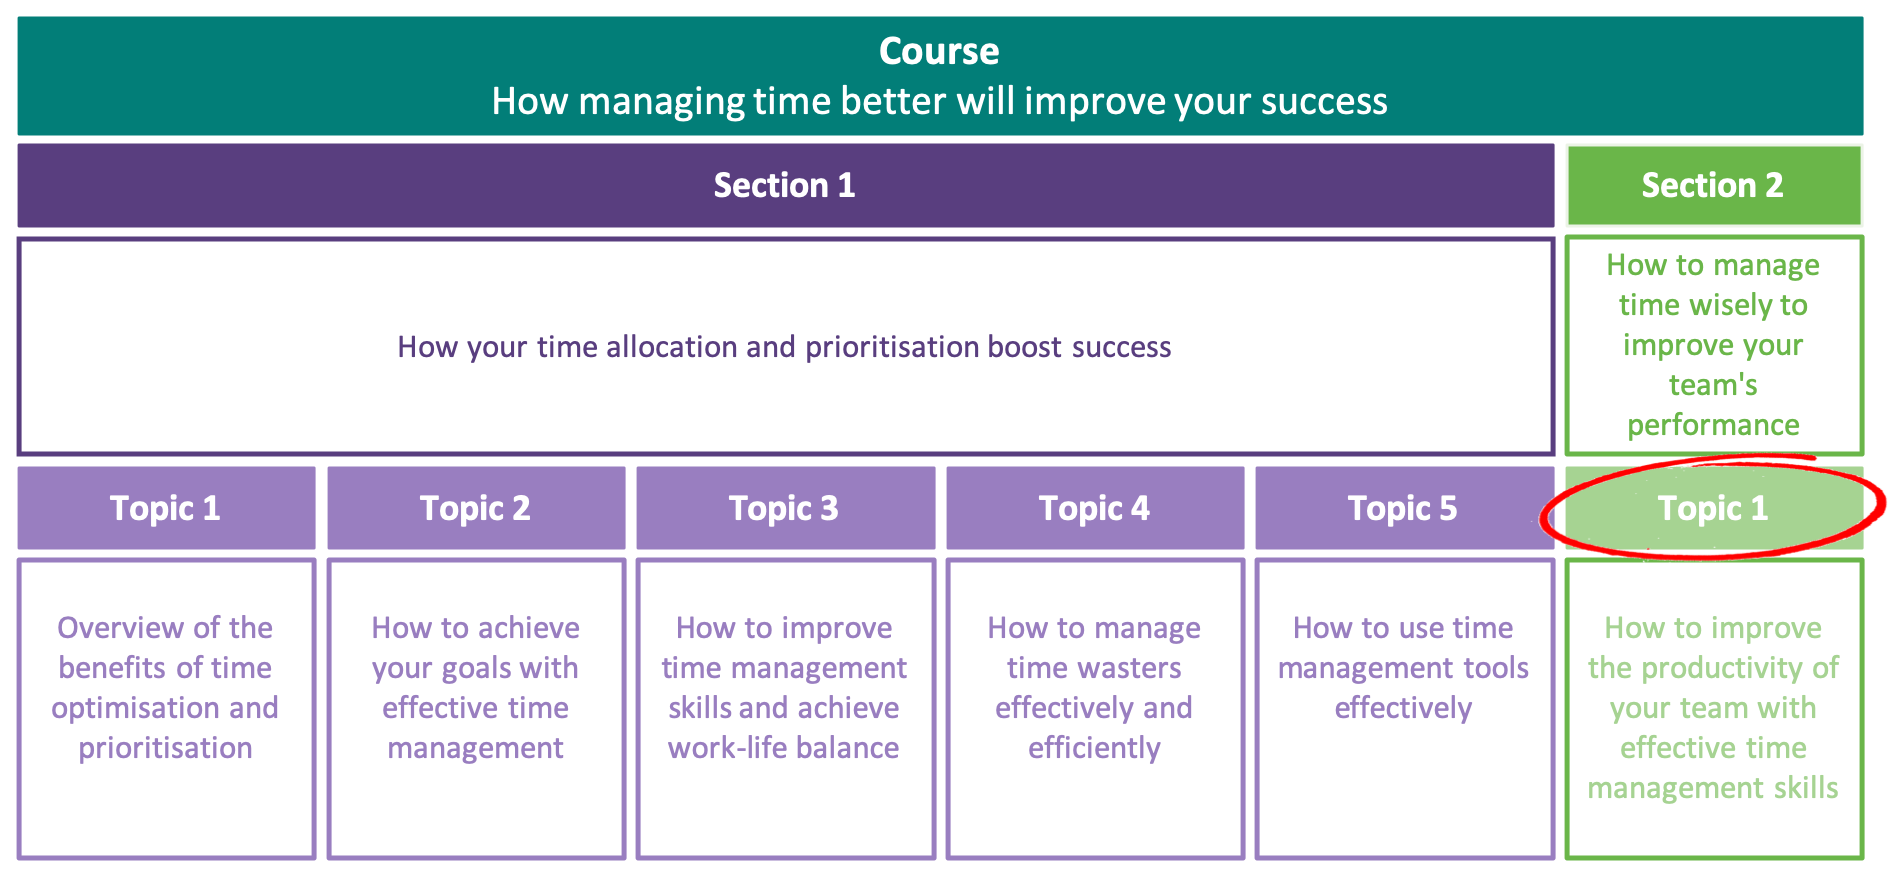 How to improve the productivity of your team with effective time management skills